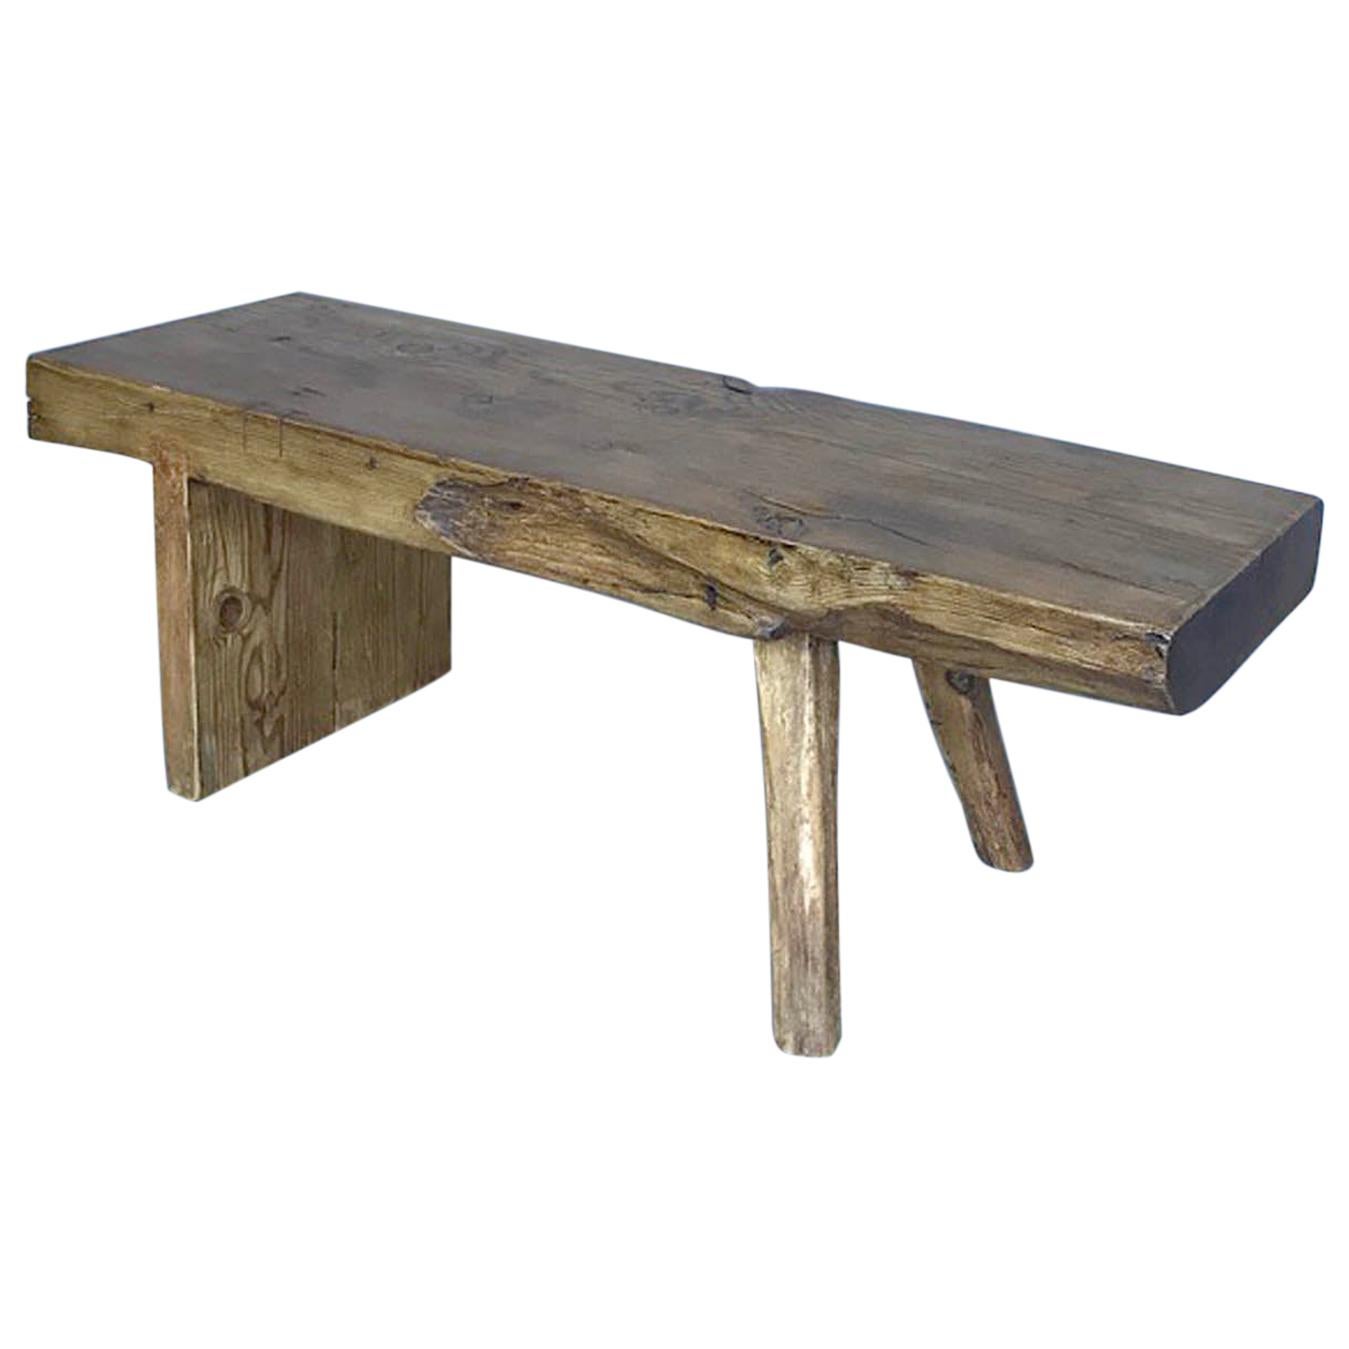 Rustic Reclaimed Wood Bench